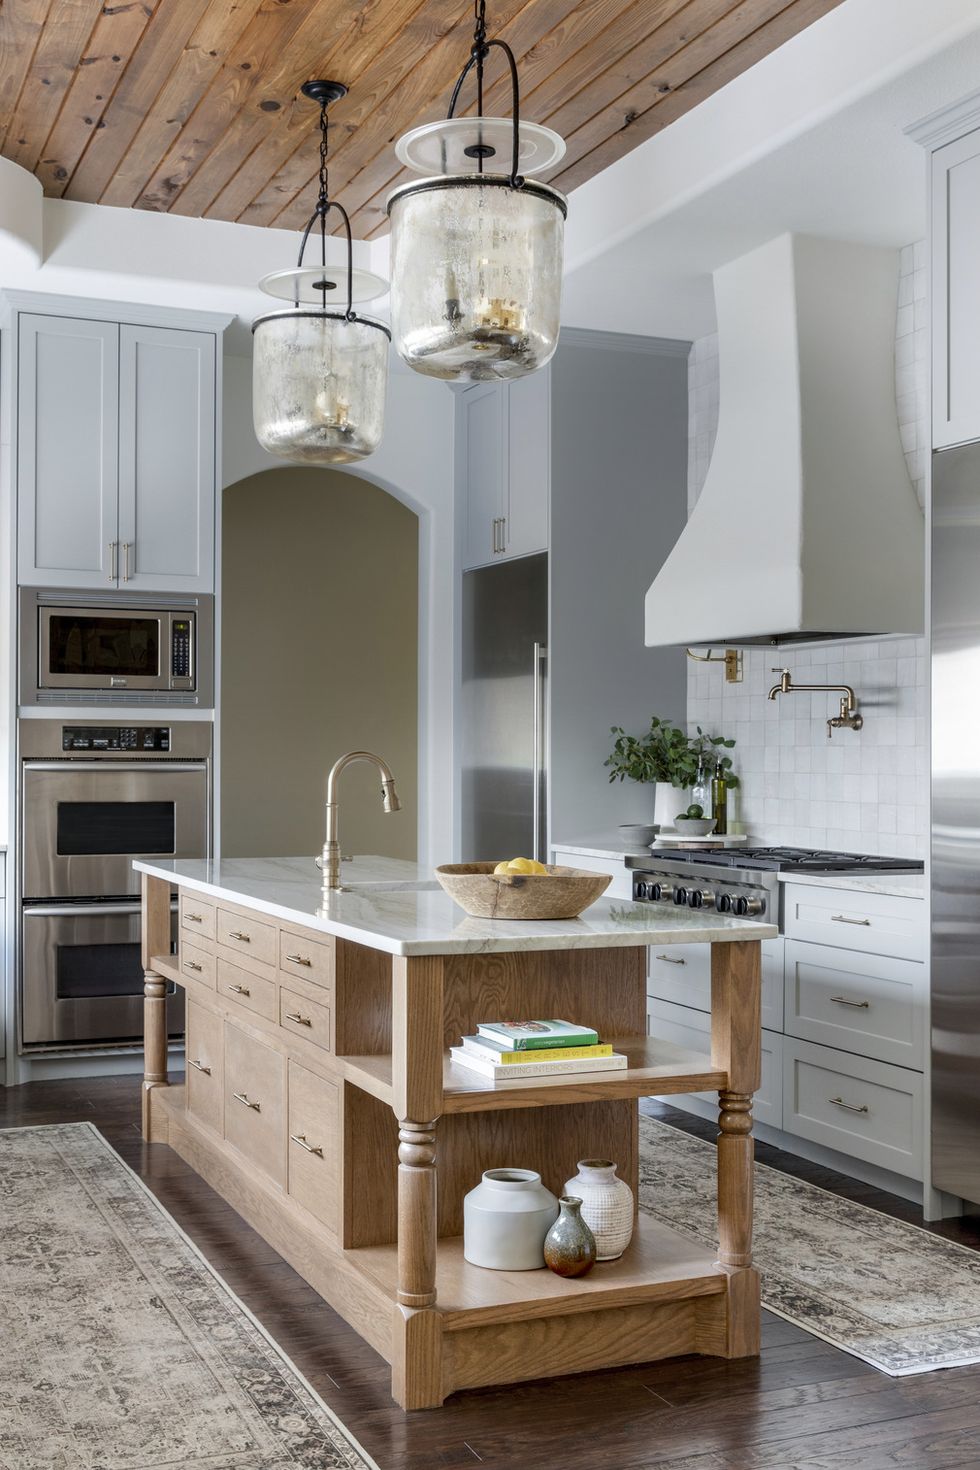 50 Kitchen Island Ideas to Perfectly Suit Your Aesthetic